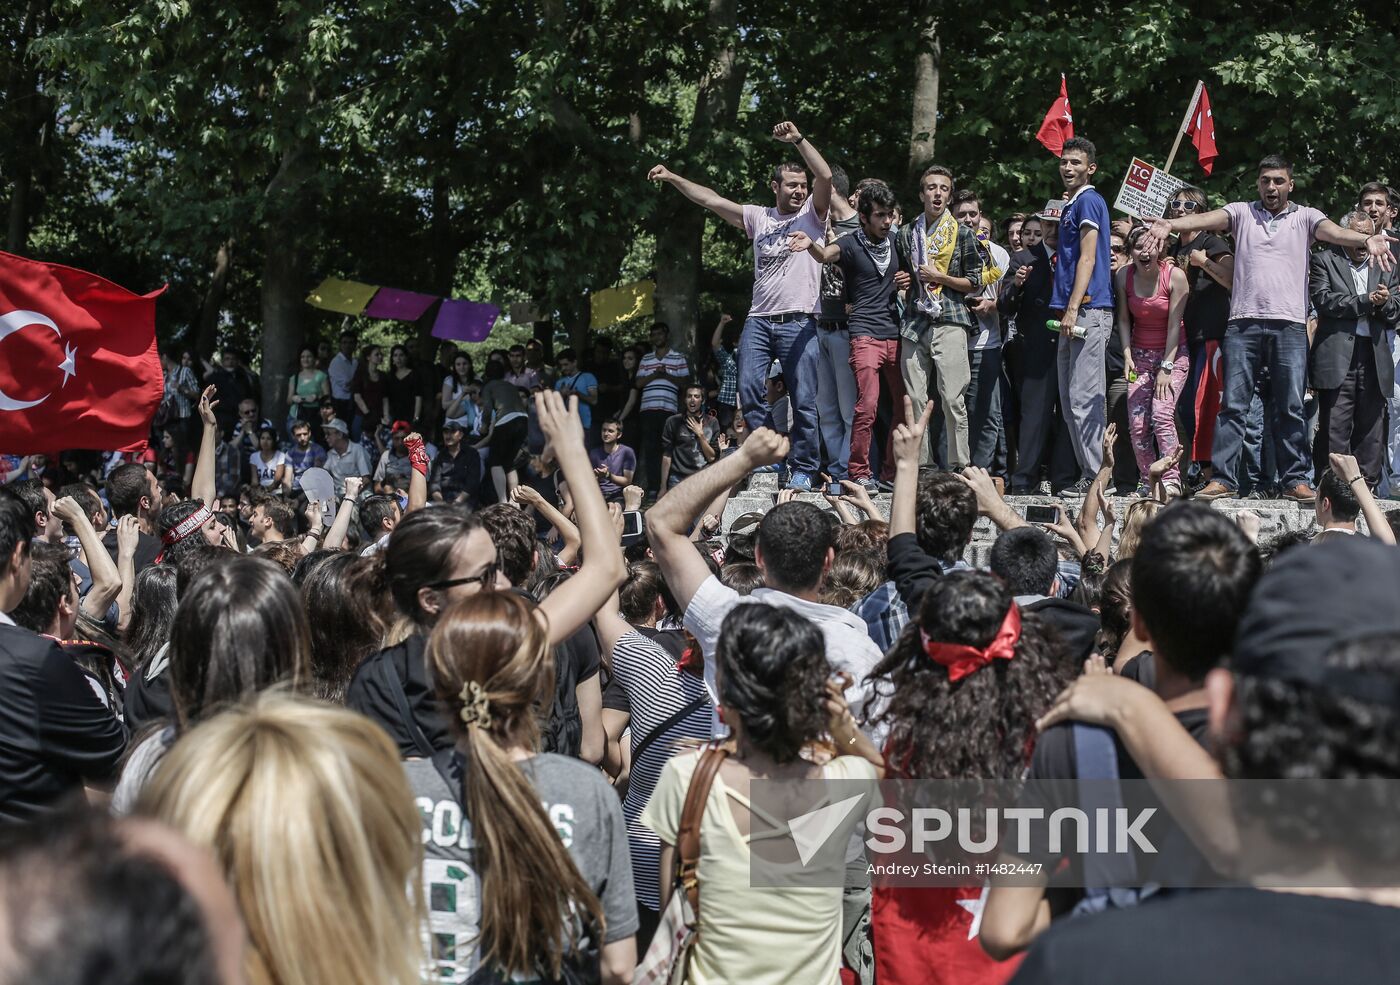 Protest rallies in Turkey